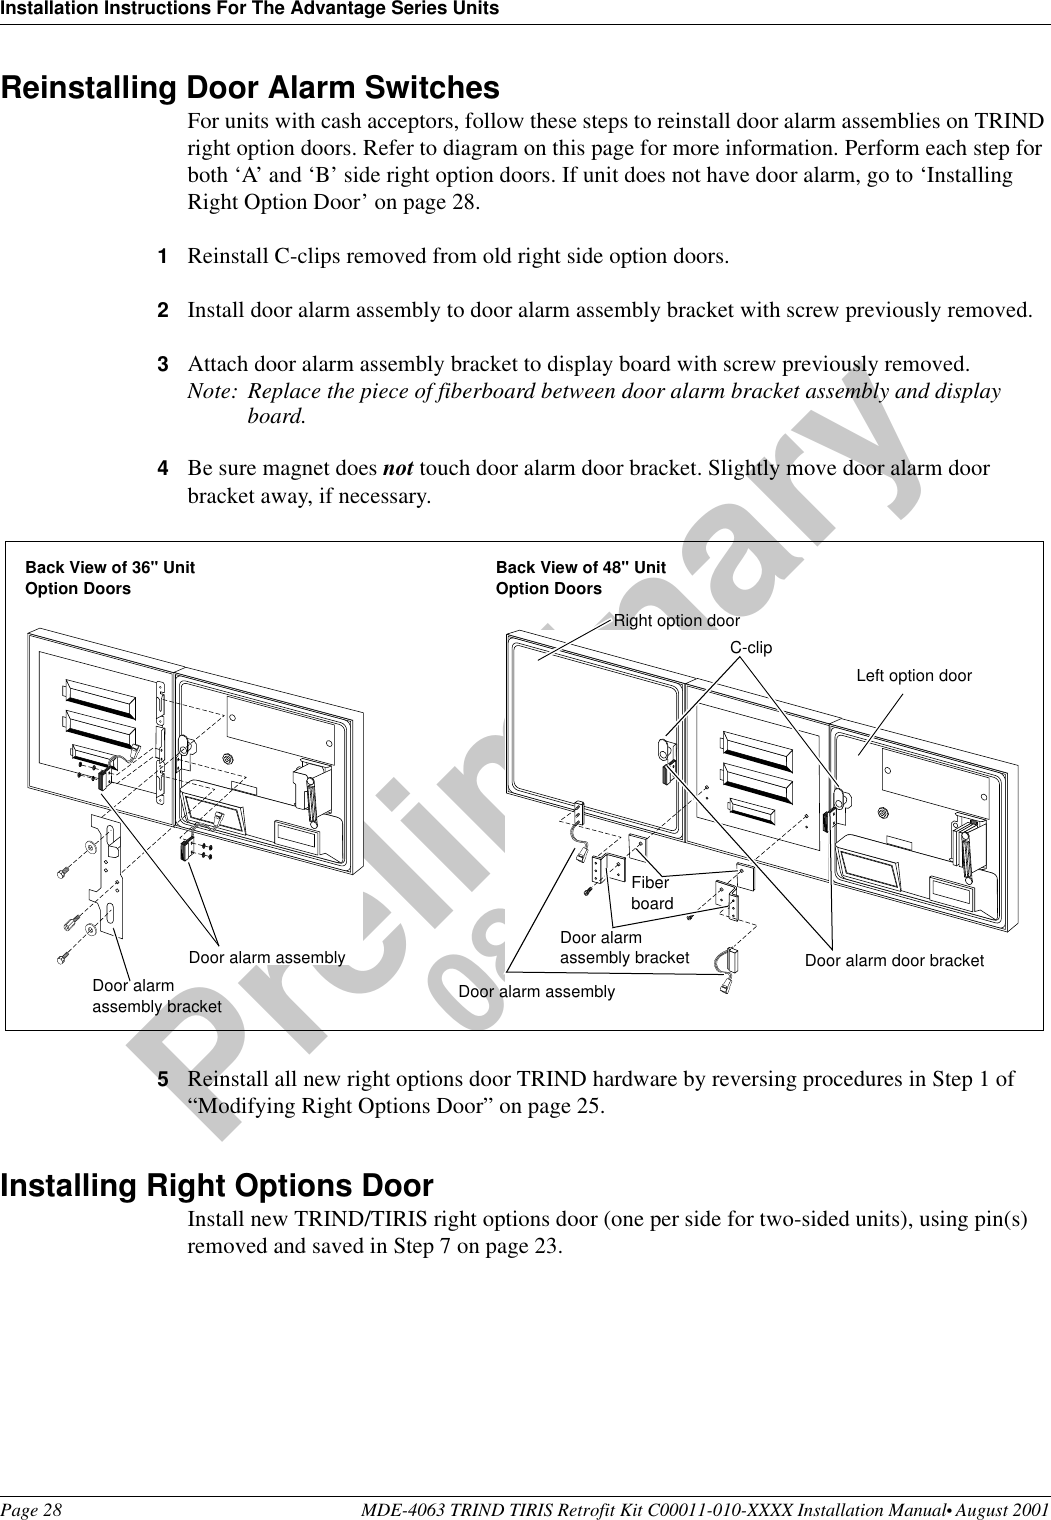 Installation Instructions For The Advantage Series UnitsPage 28 MDE-4063 TRIND TIRIS Retrofit Kit C00011-010-XXXX Installation Manual• August 2001Preliminary08-24-01Reinstalling Door Alarm SwitchesFor units with cash acceptors, follow these steps to reinstall door alarm assemblies on TRIND right option doors. Refer to diagram on this page for more information. Perform each step for both ‘A’ and ‘B’ side right option doors. If unit does not have door alarm, go to ‘Installing Right Option Door’ on page 28.1Reinstall C-clips removed from old right side option doors.2Install door alarm assembly to door alarm assembly bracket with screw previously removed.3Attach door alarm assembly bracket to display board with screw previously removed.Note: Replace the piece of fiberboard between door alarm bracket assembly and display board.4Be sure magnet does not touch door alarm door bracket. Slightly move door alarm door bracket away, if necessary.5Reinstall all new right options door TRIND hardware by reversing procedures in Step 1 of “Modifying Right Options Door” on page 25.Installing Right Options DoorInstall new TRIND/TIRIS right options door (one per side for two-sided units), using pin(s) removed and saved in Step 7 on page 23.Left option doorRight option doorDoor alarm assemblyFiber boardDoor alarm assembly bracketC-clipDoor alarm door bracketDoor alarm assemblyDoor alarm assembly bracketBack View of 36&quot; Unit Option Doors Back View of 48&quot; Unit Option Doors